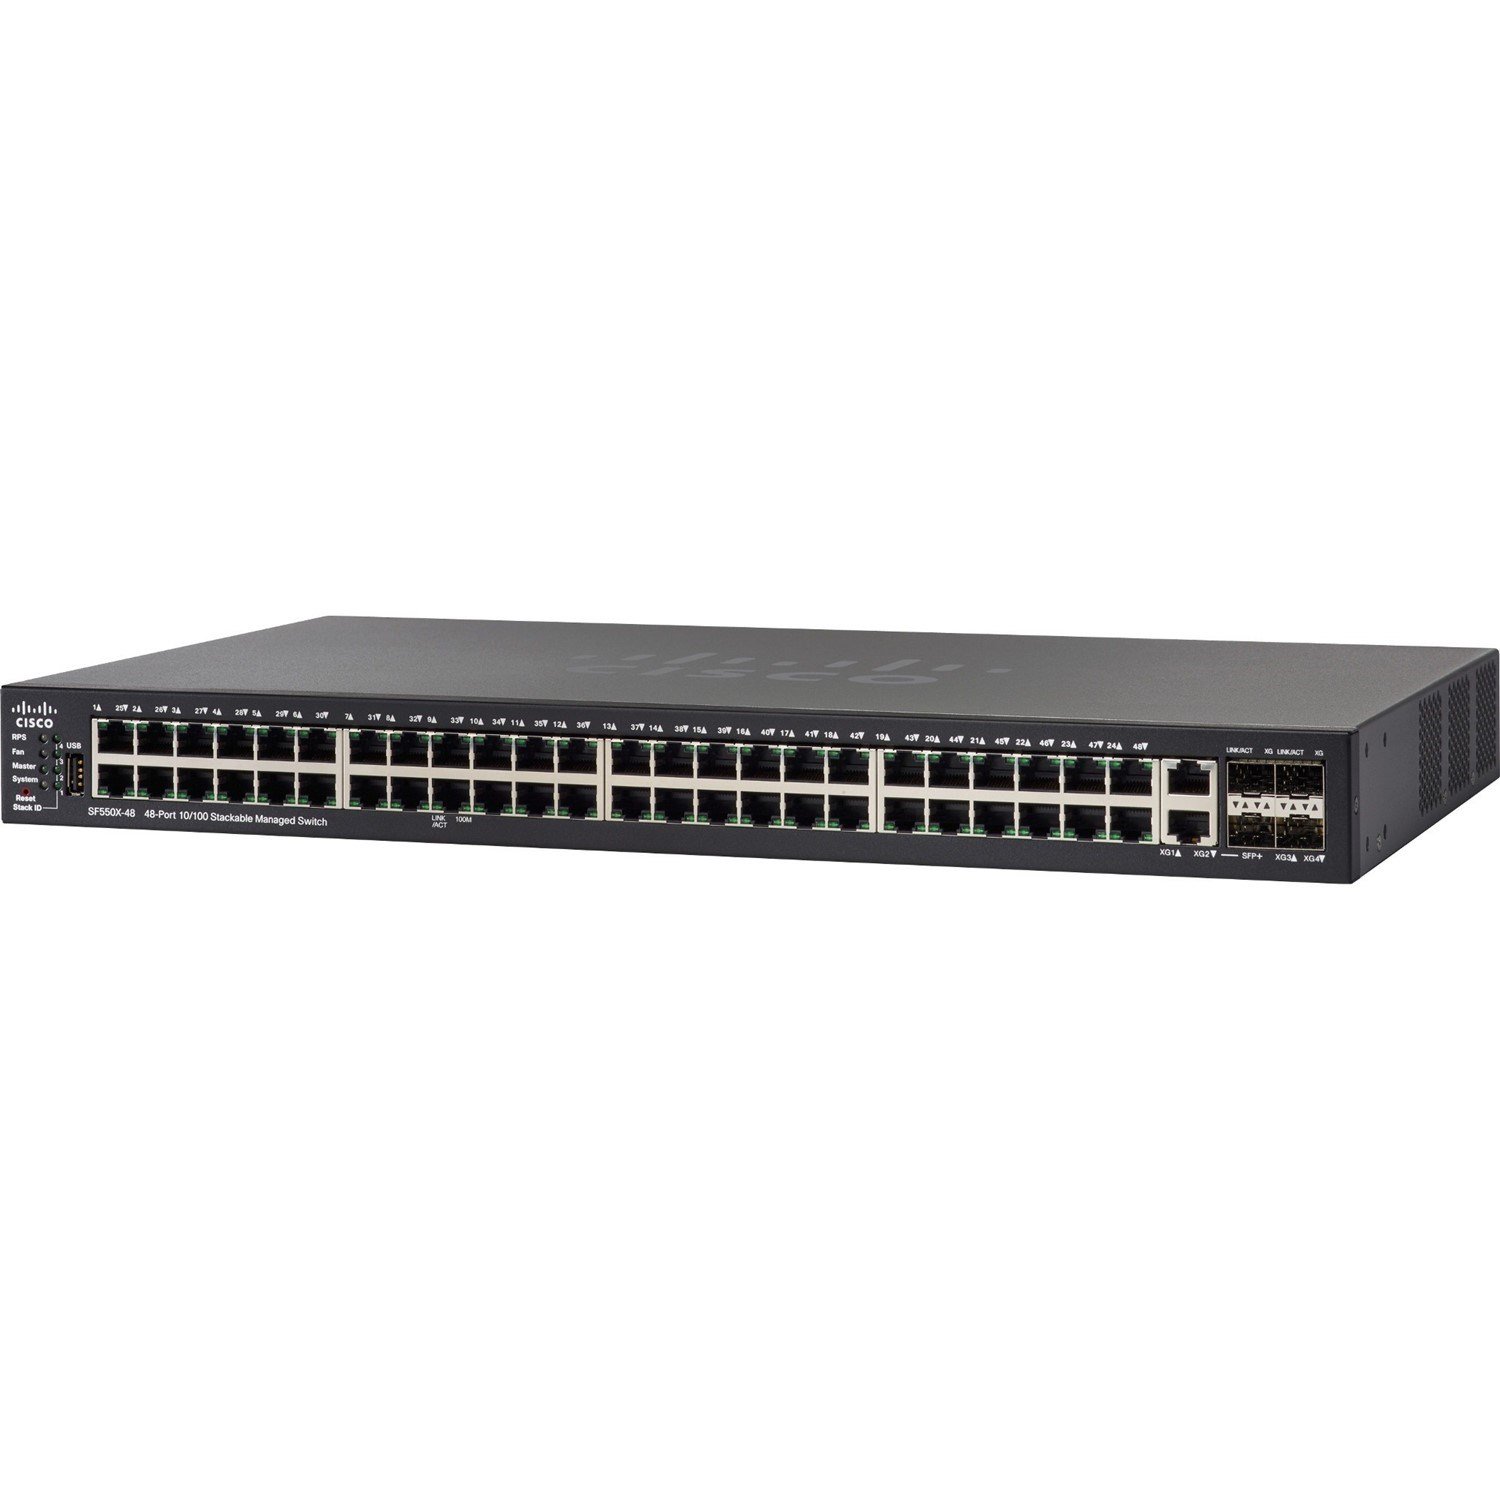 Cisco 48-port 10/100 Stackable Switch.SF550X-48/SF550X-48-K9